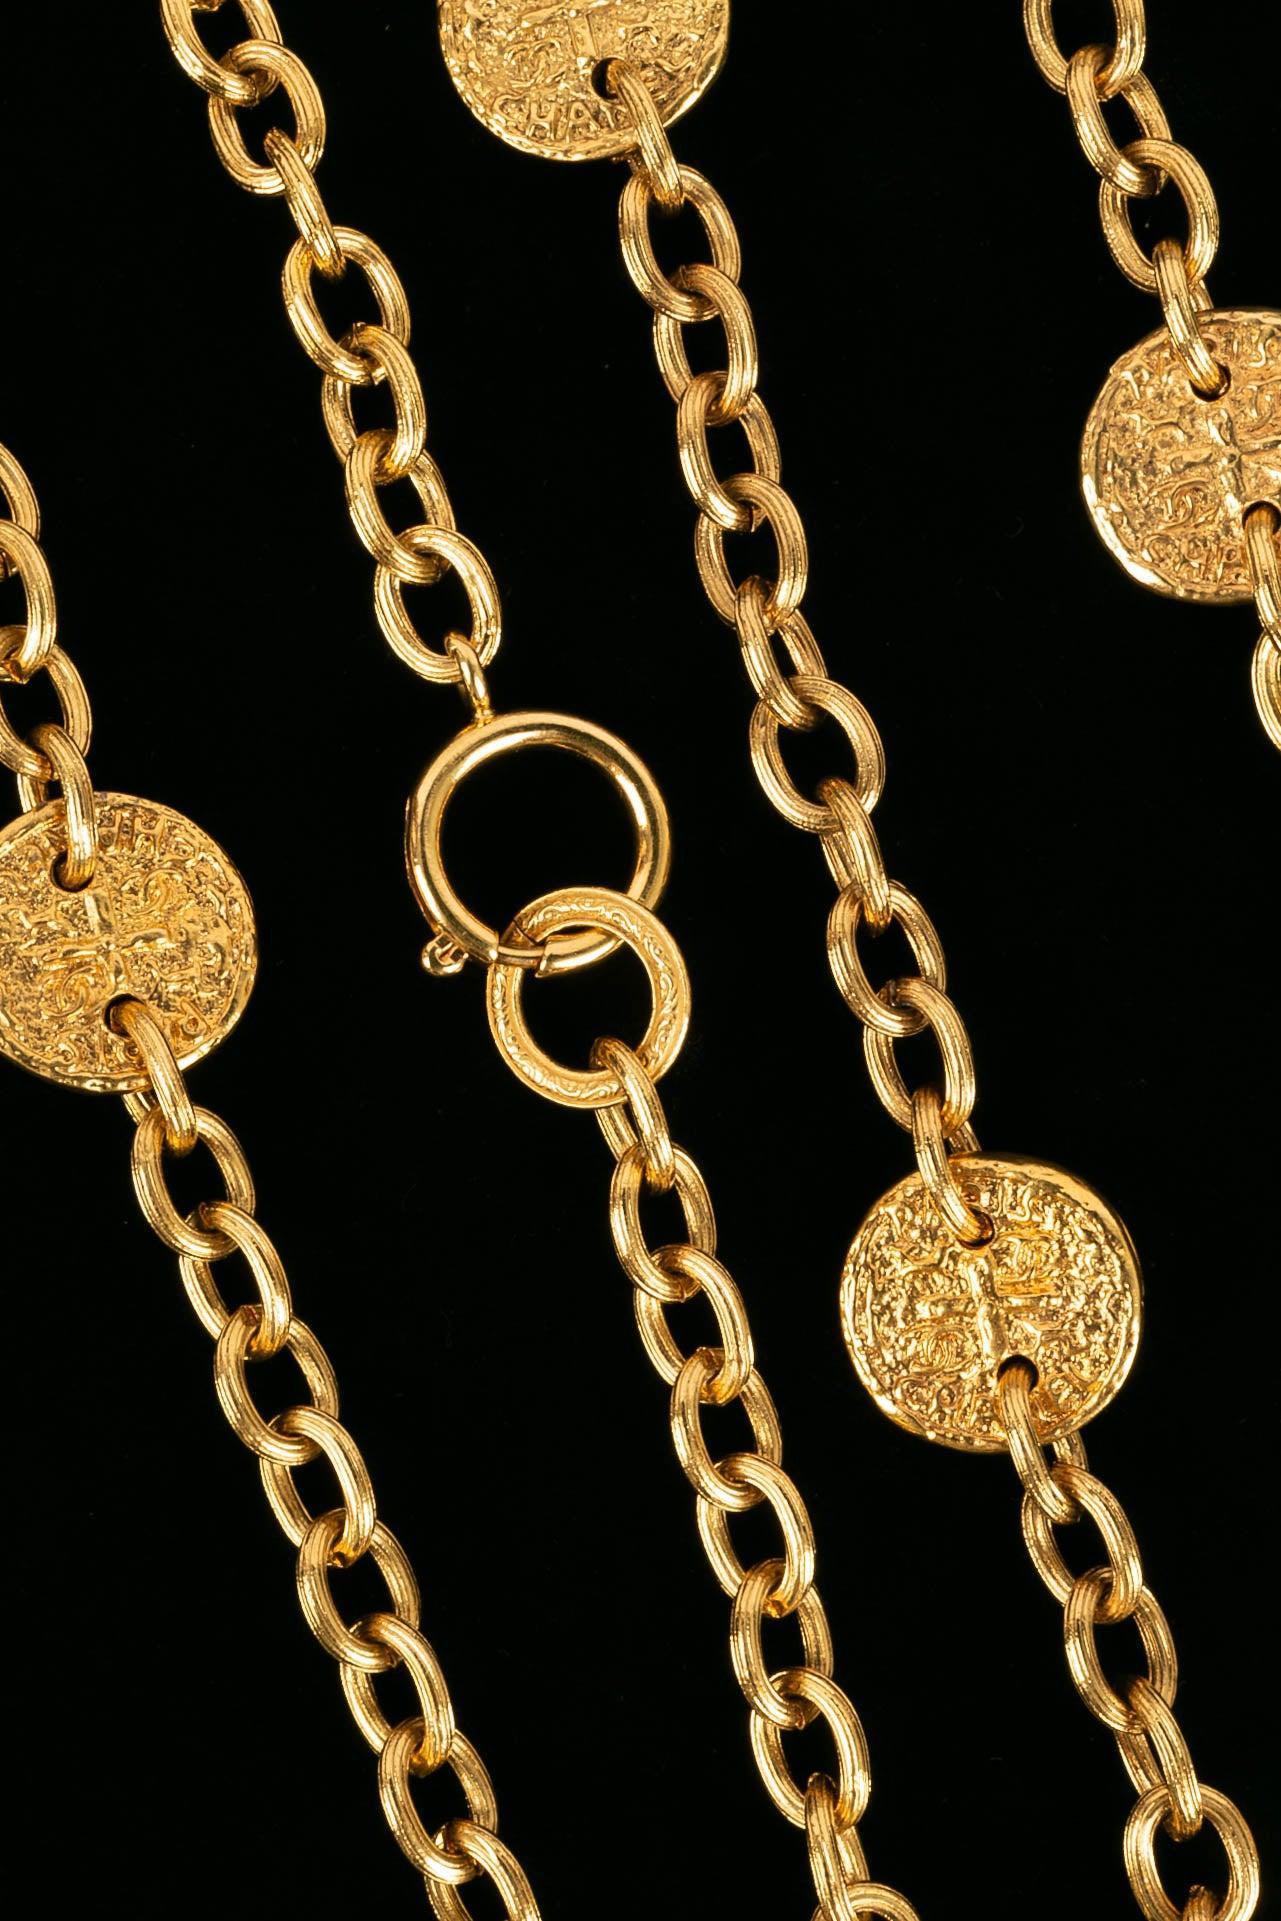 Chanel Necklace in Gold Metal Chain and Medals 2